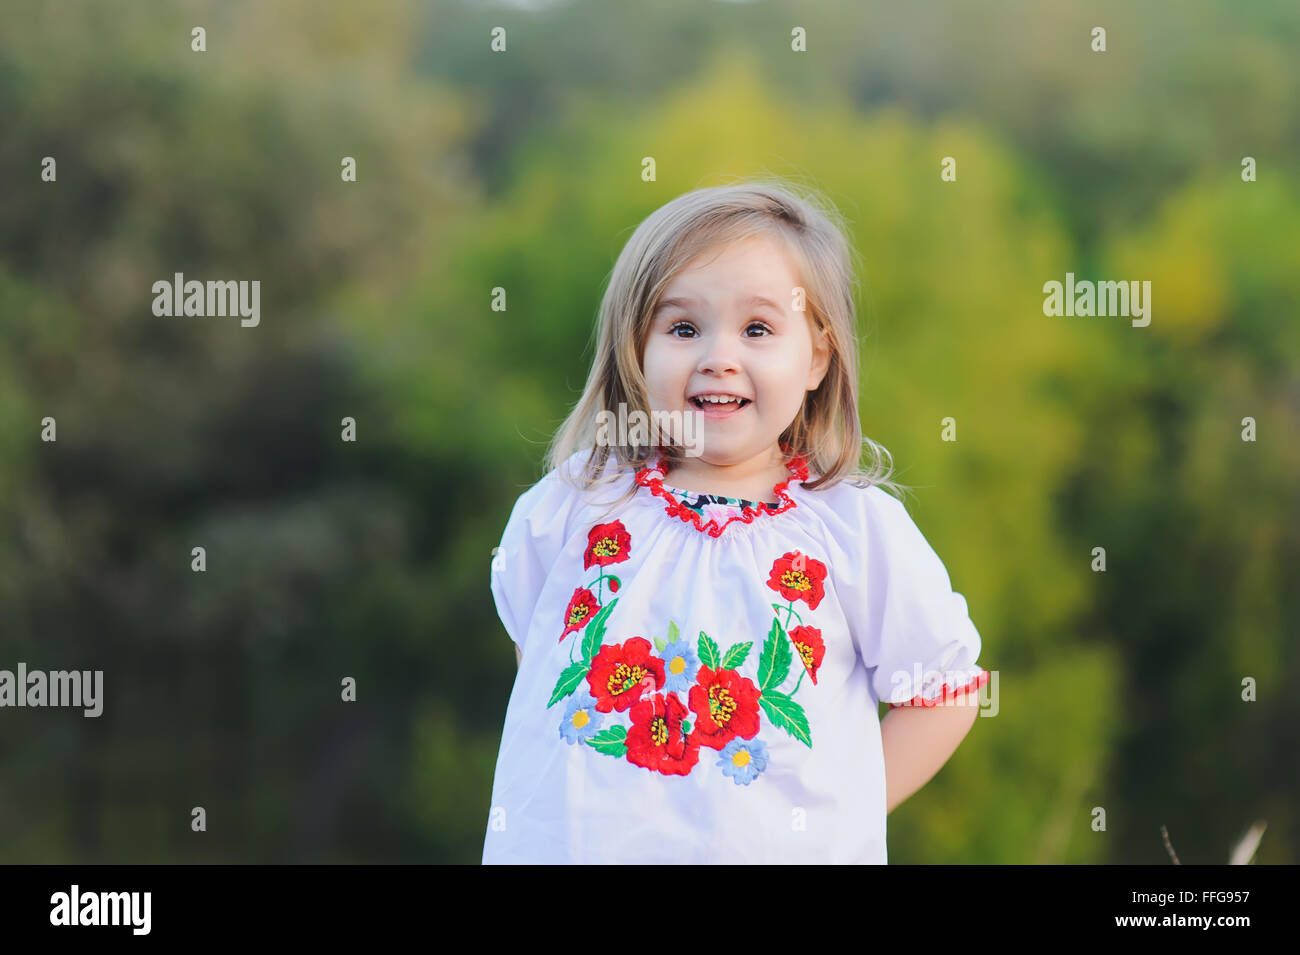 Little 3-year-old girl  emotionally rejoices. A girl dressed in white Ukrainian national dress with embroidered flowers. Stock Photo